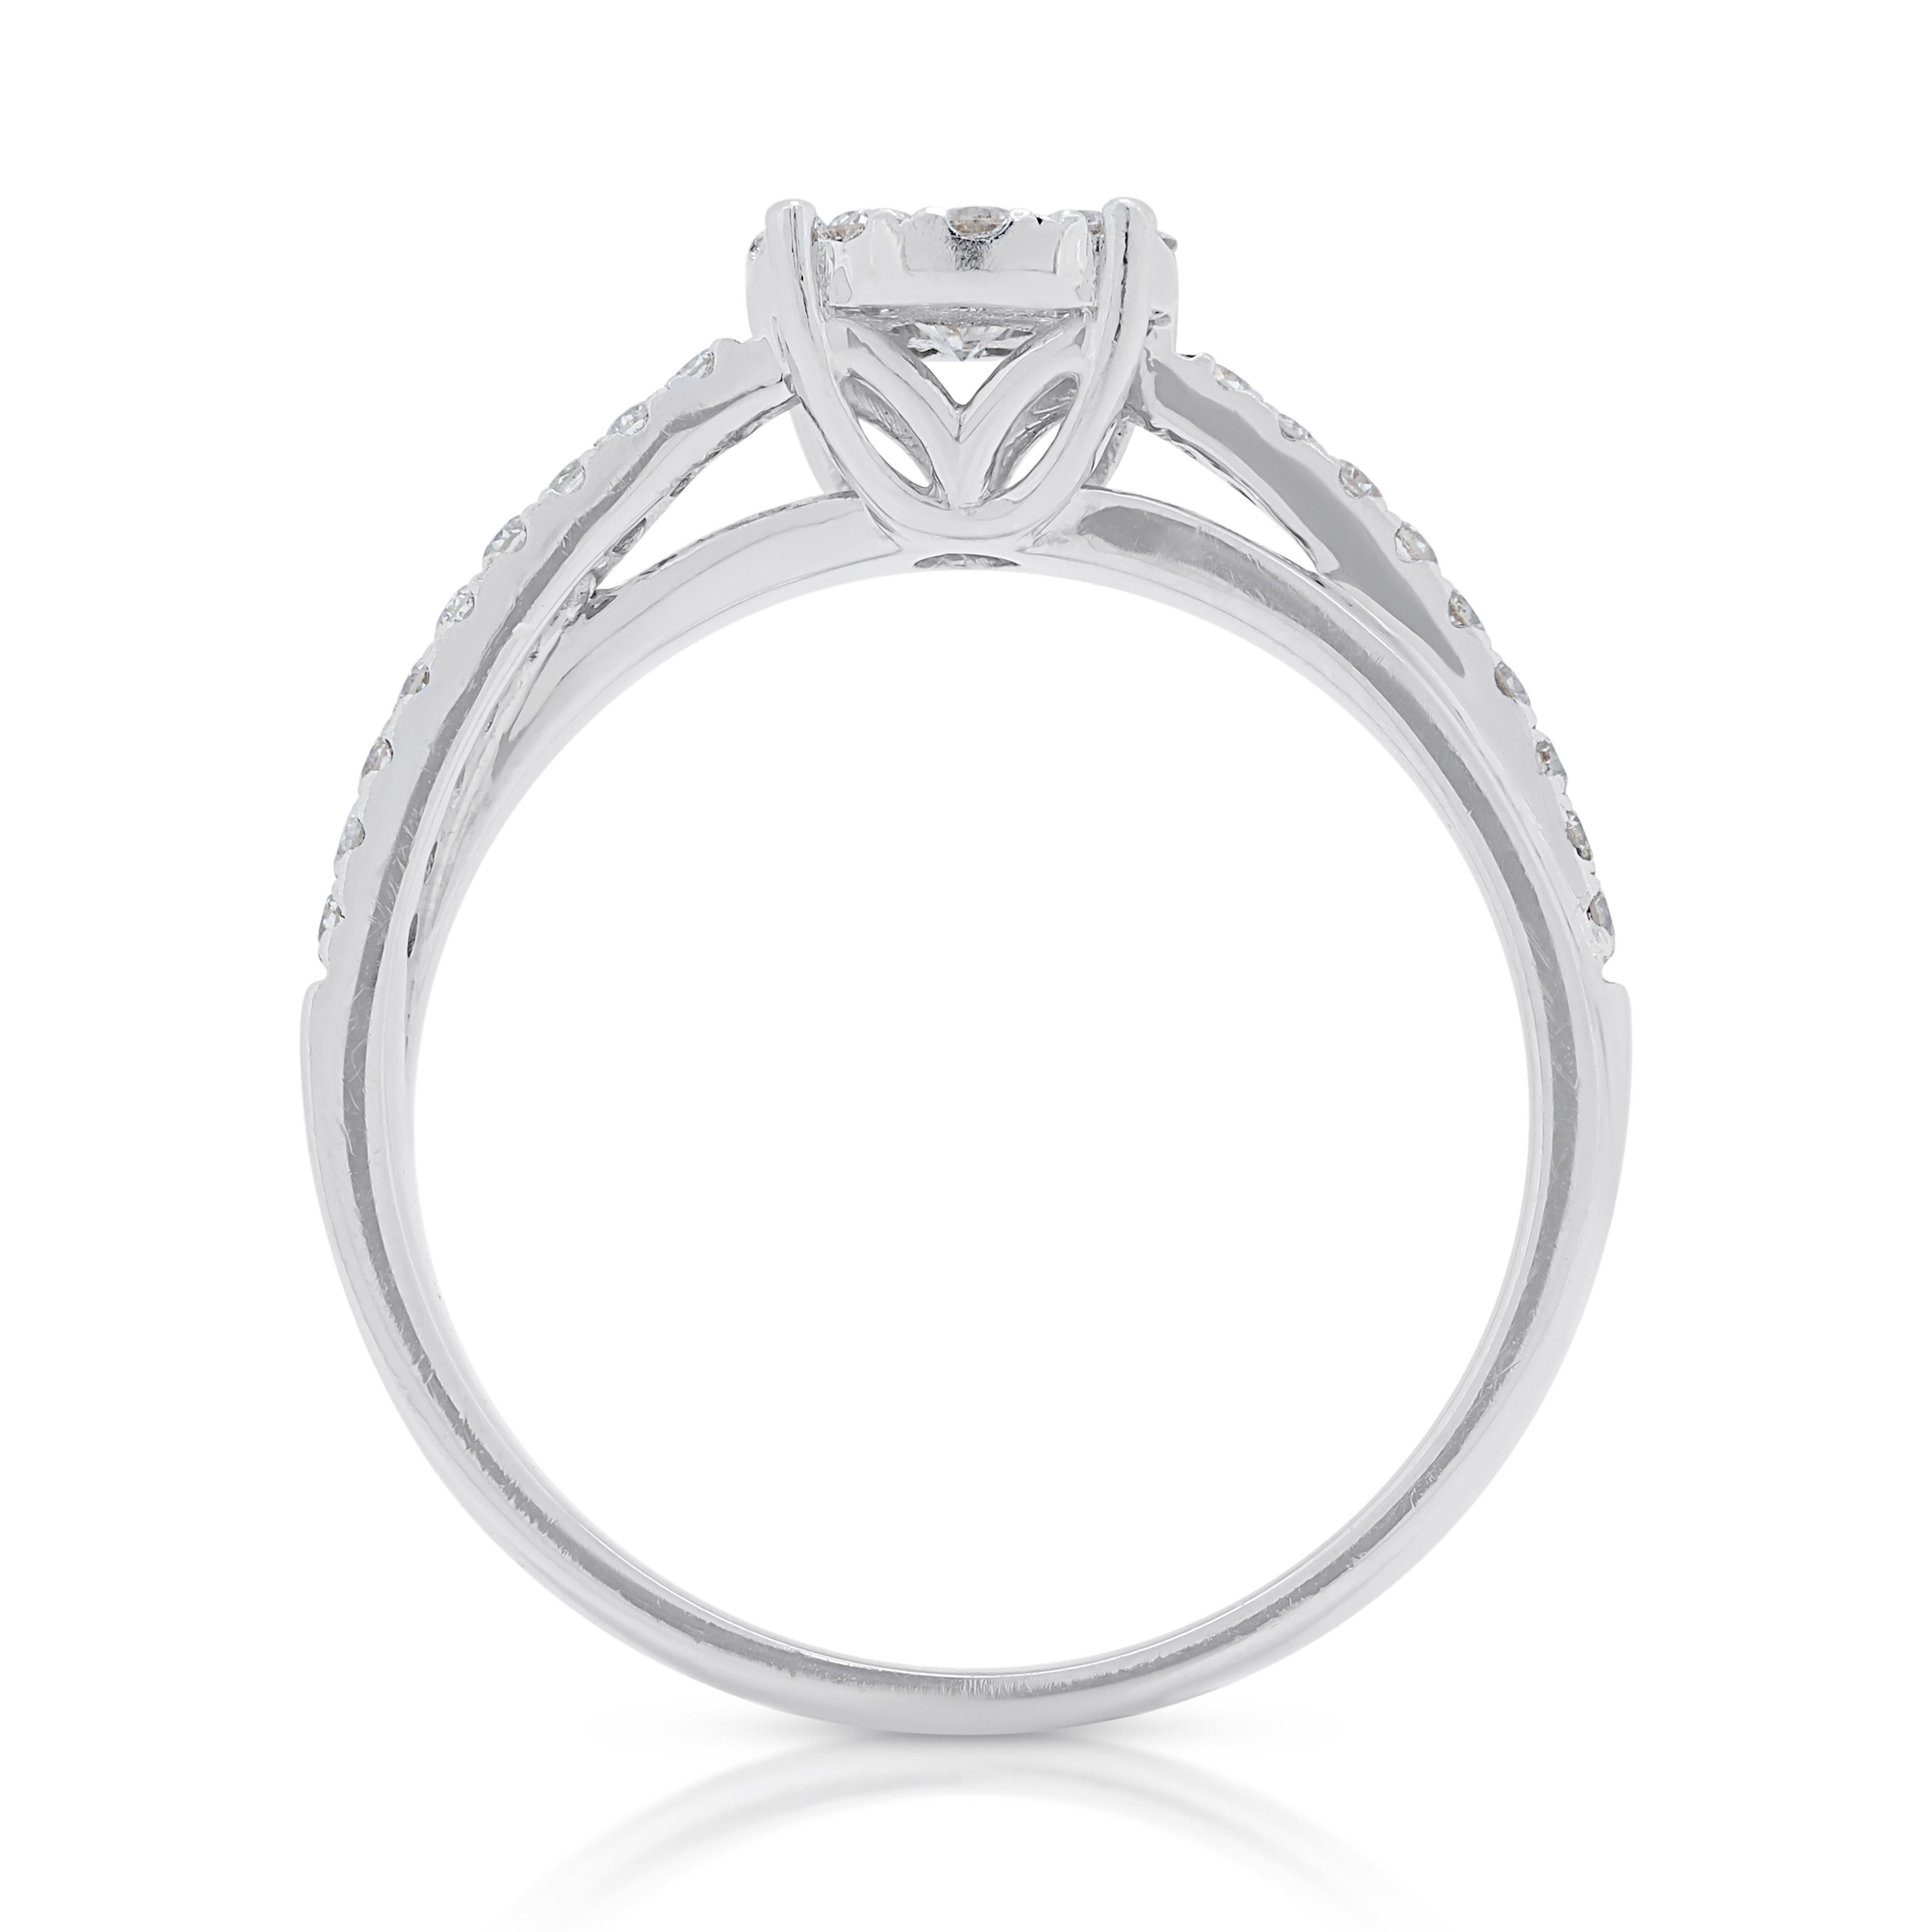 Dazzling 0.62ct Diamond Pave Ring in 18K White Gold For Sale 2